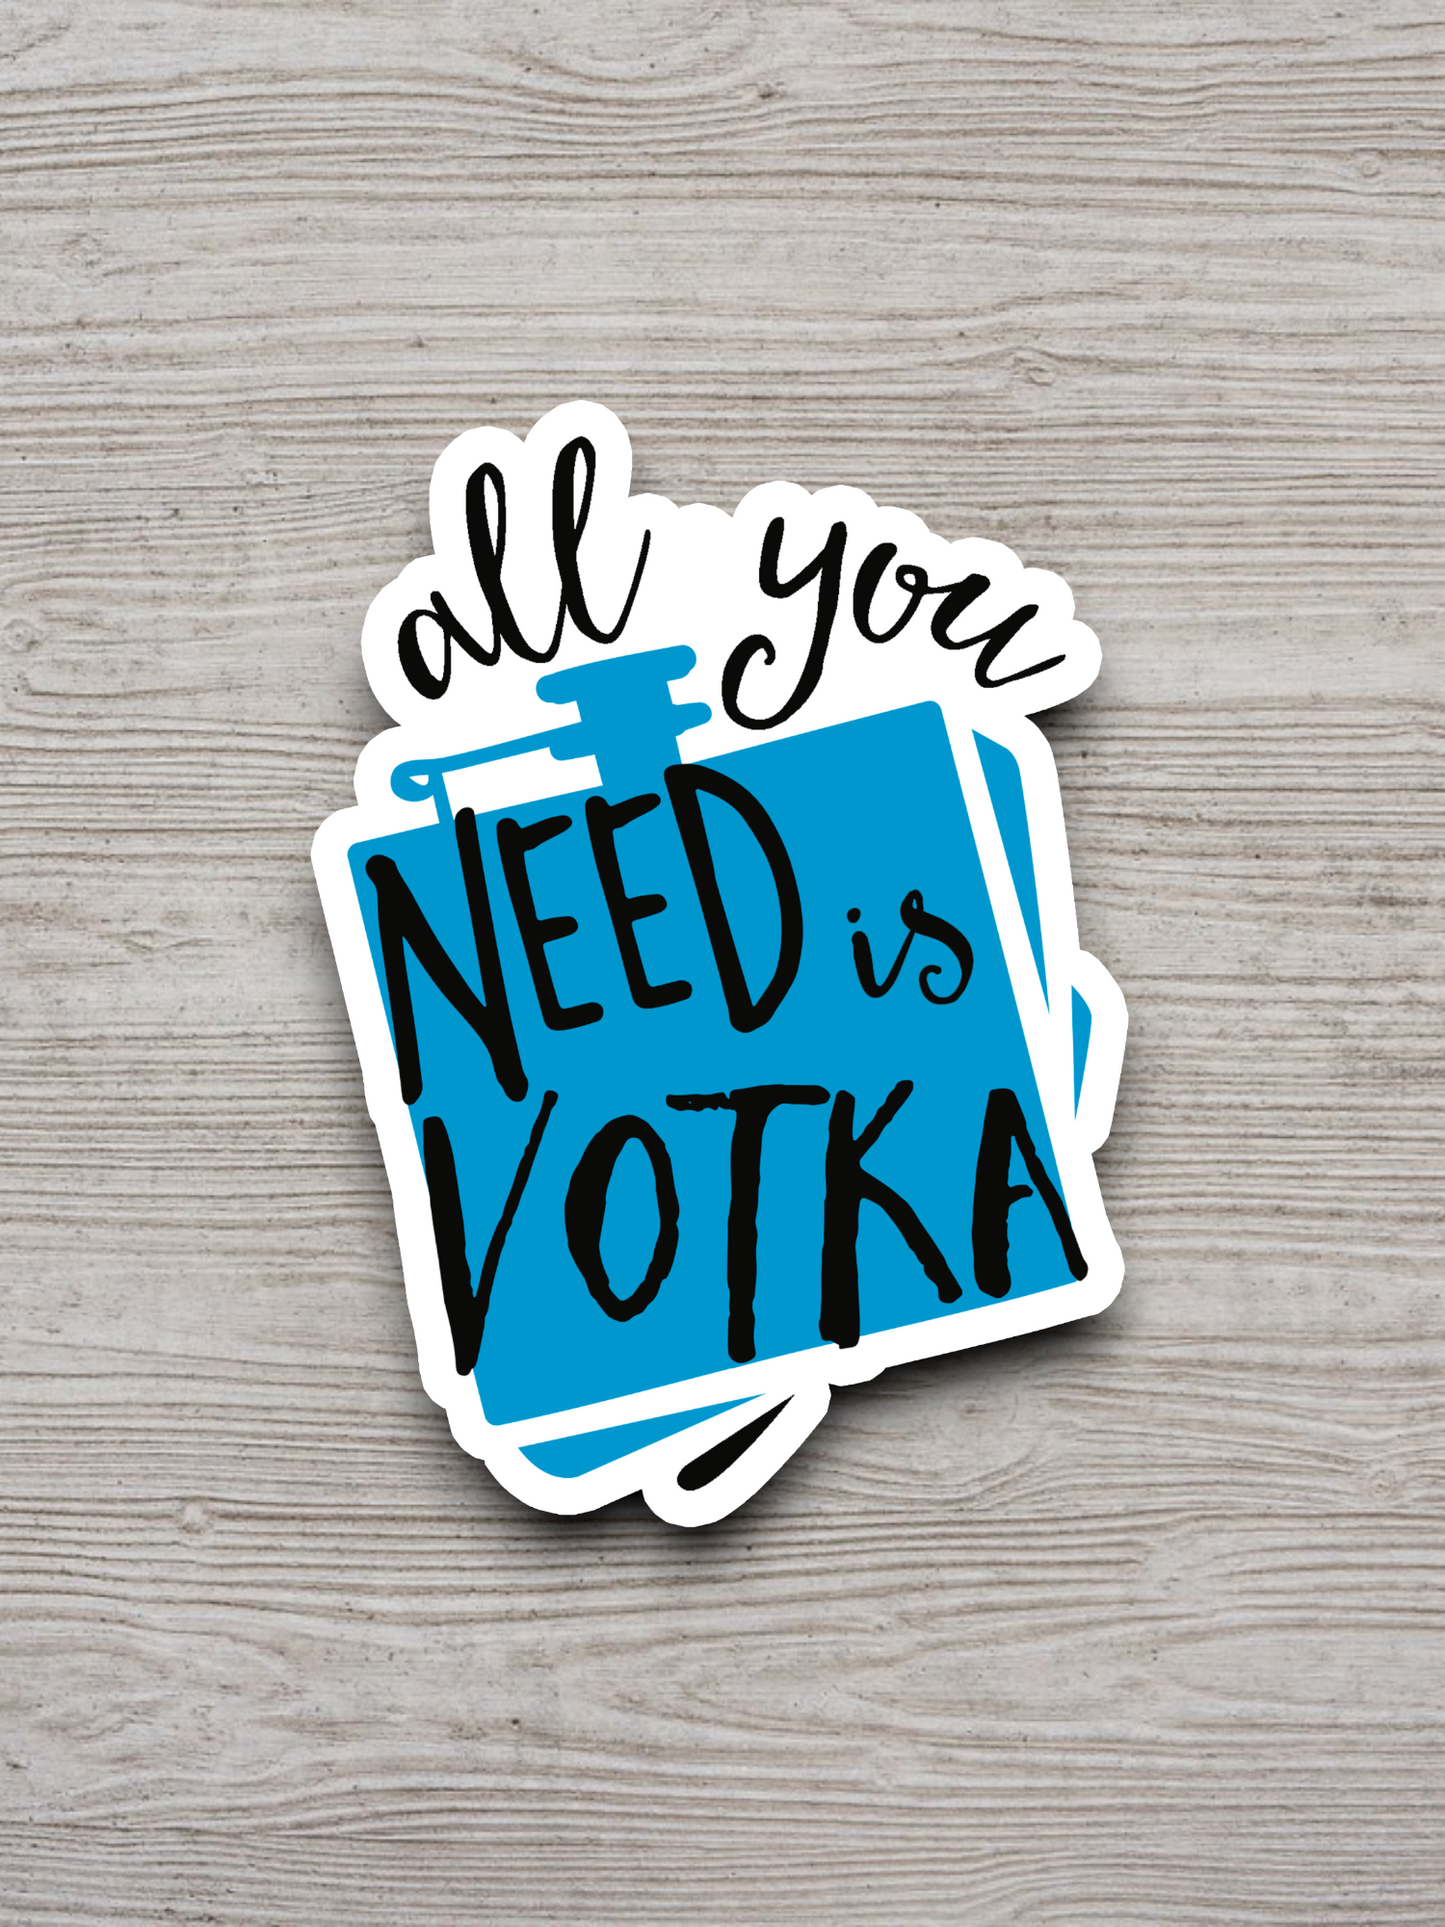 All You Need is Votka Sticker